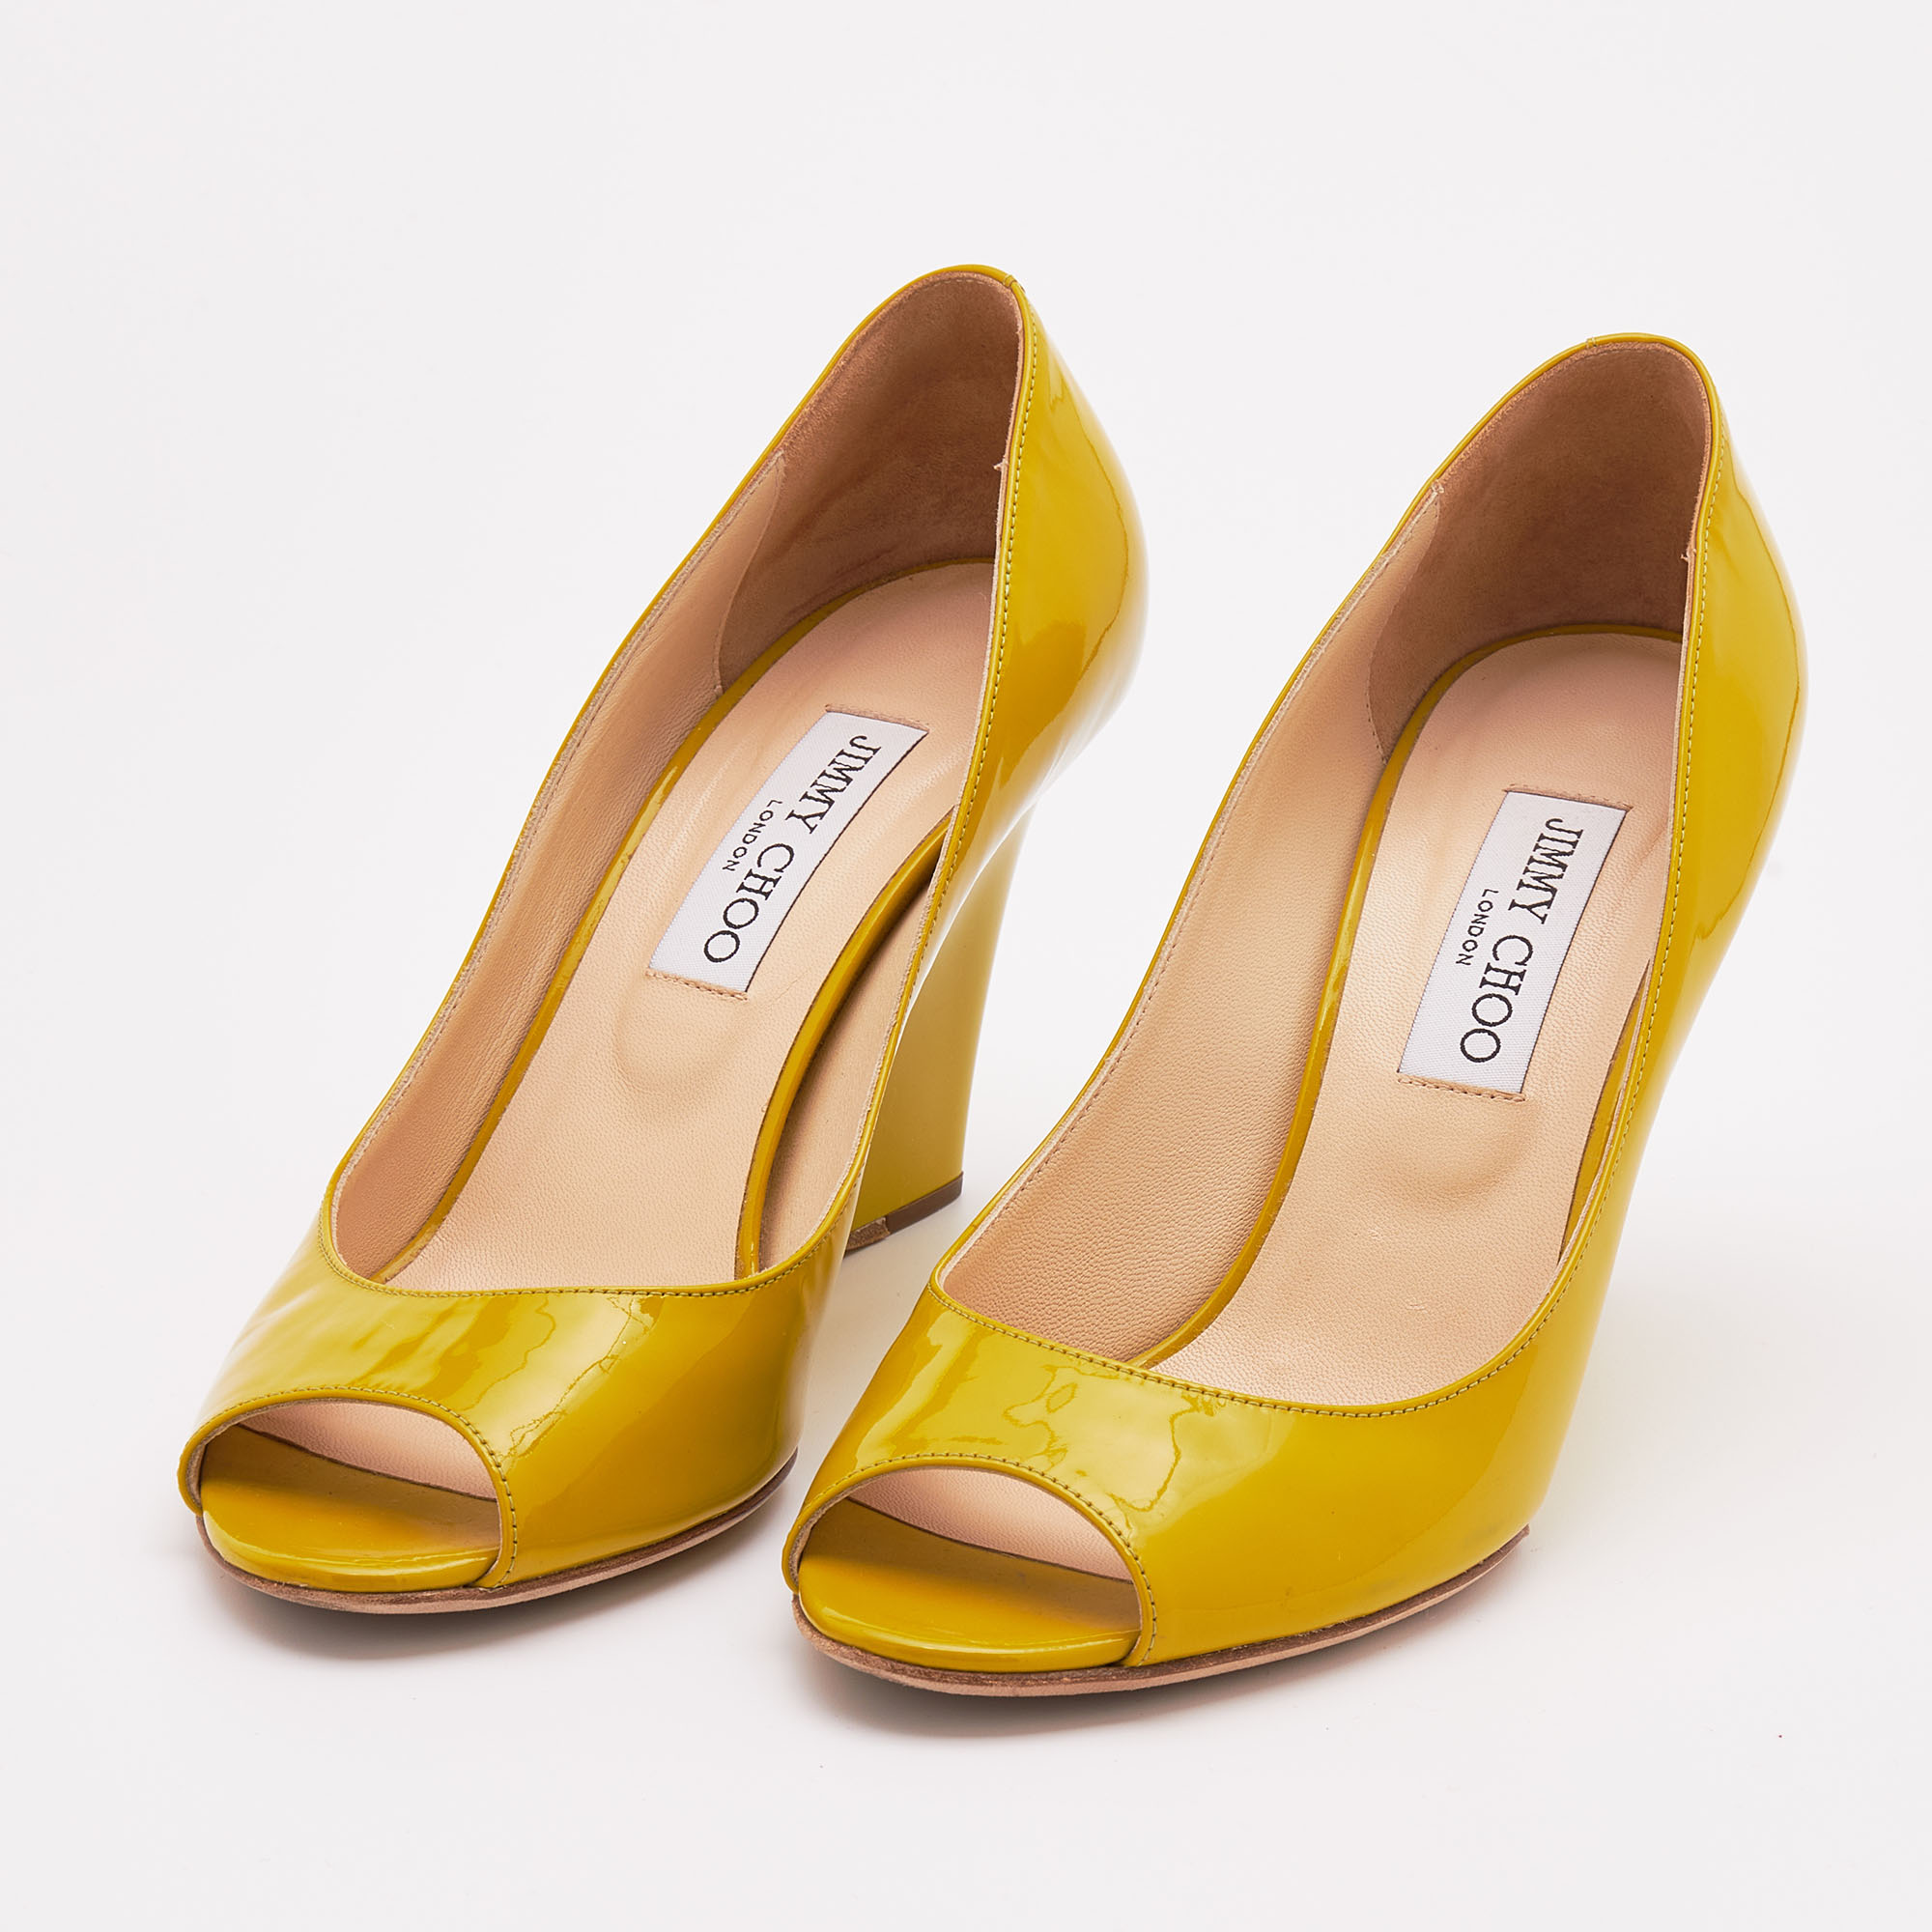 

Jimmy Choo Citrine Patent Leather Bello Peep Toe Wedge Pumps Size, Yellow